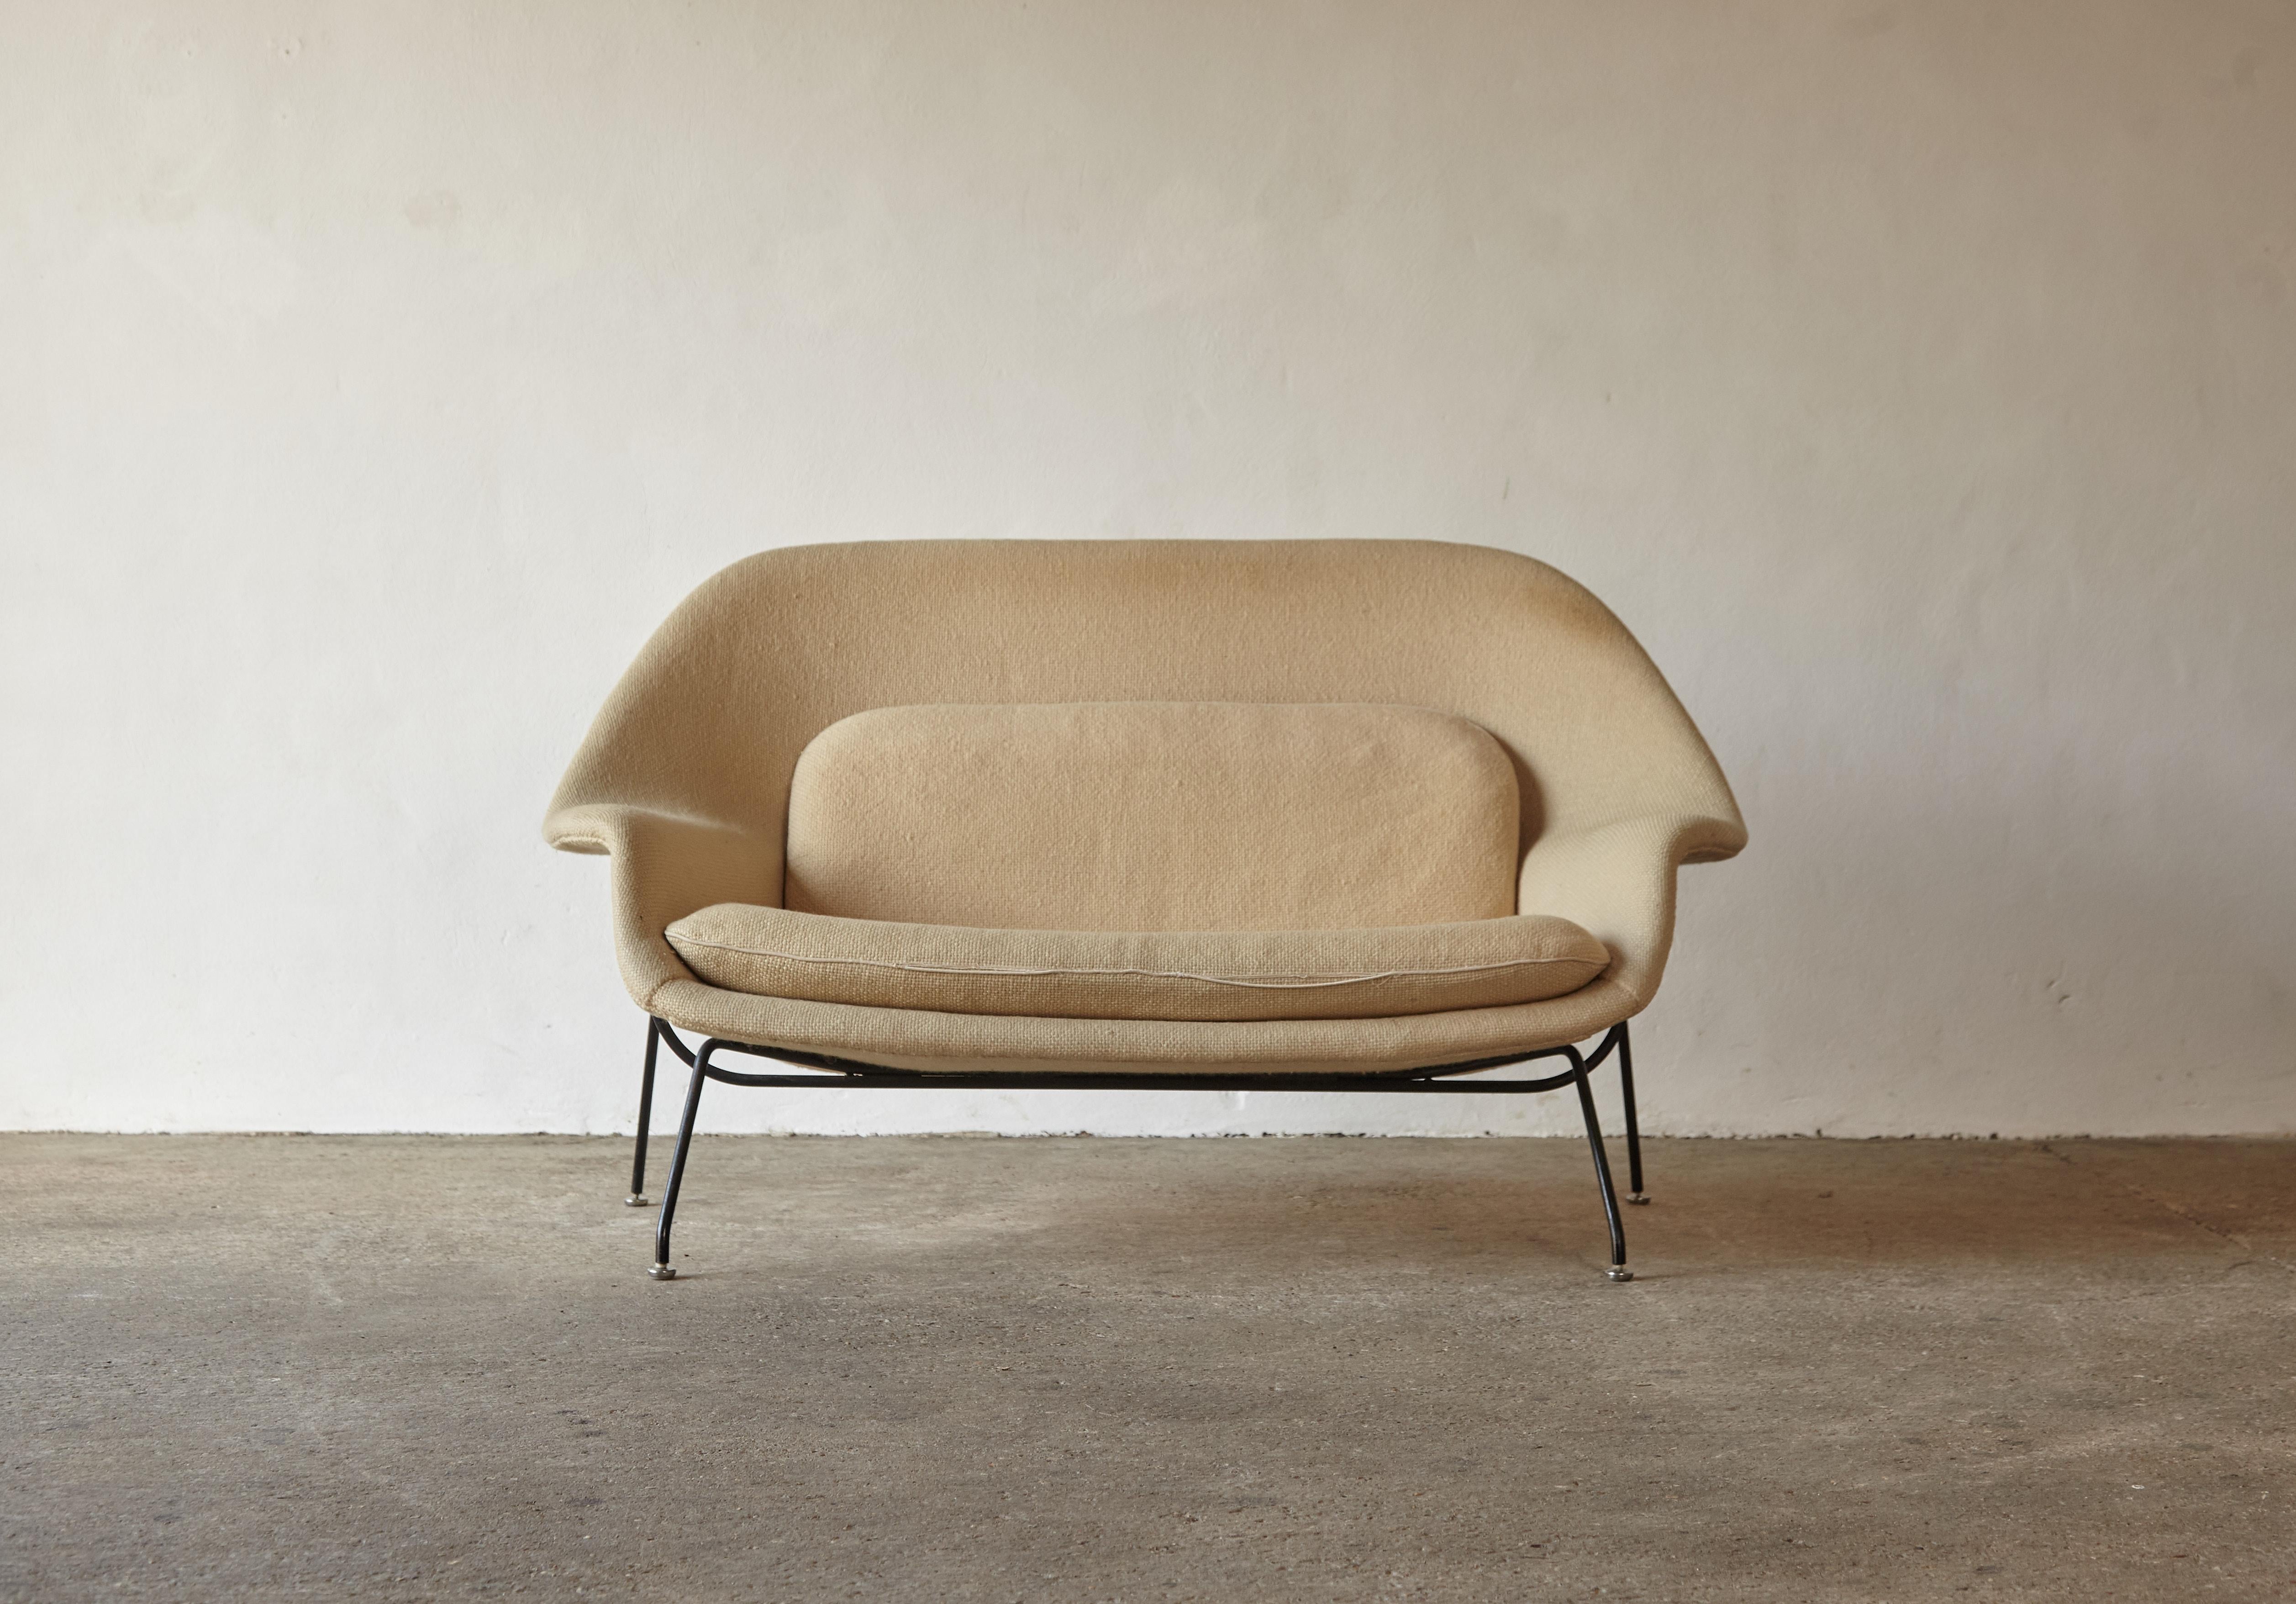 A very rare early production Eero Saarinen womb settee, made by Knoll, USA, 1950s. Original Knoll fabric, fibreglass, black enameled steel frames and first edition feet / glides. Structually sound. The original Knoll fabric shows some wear and marks